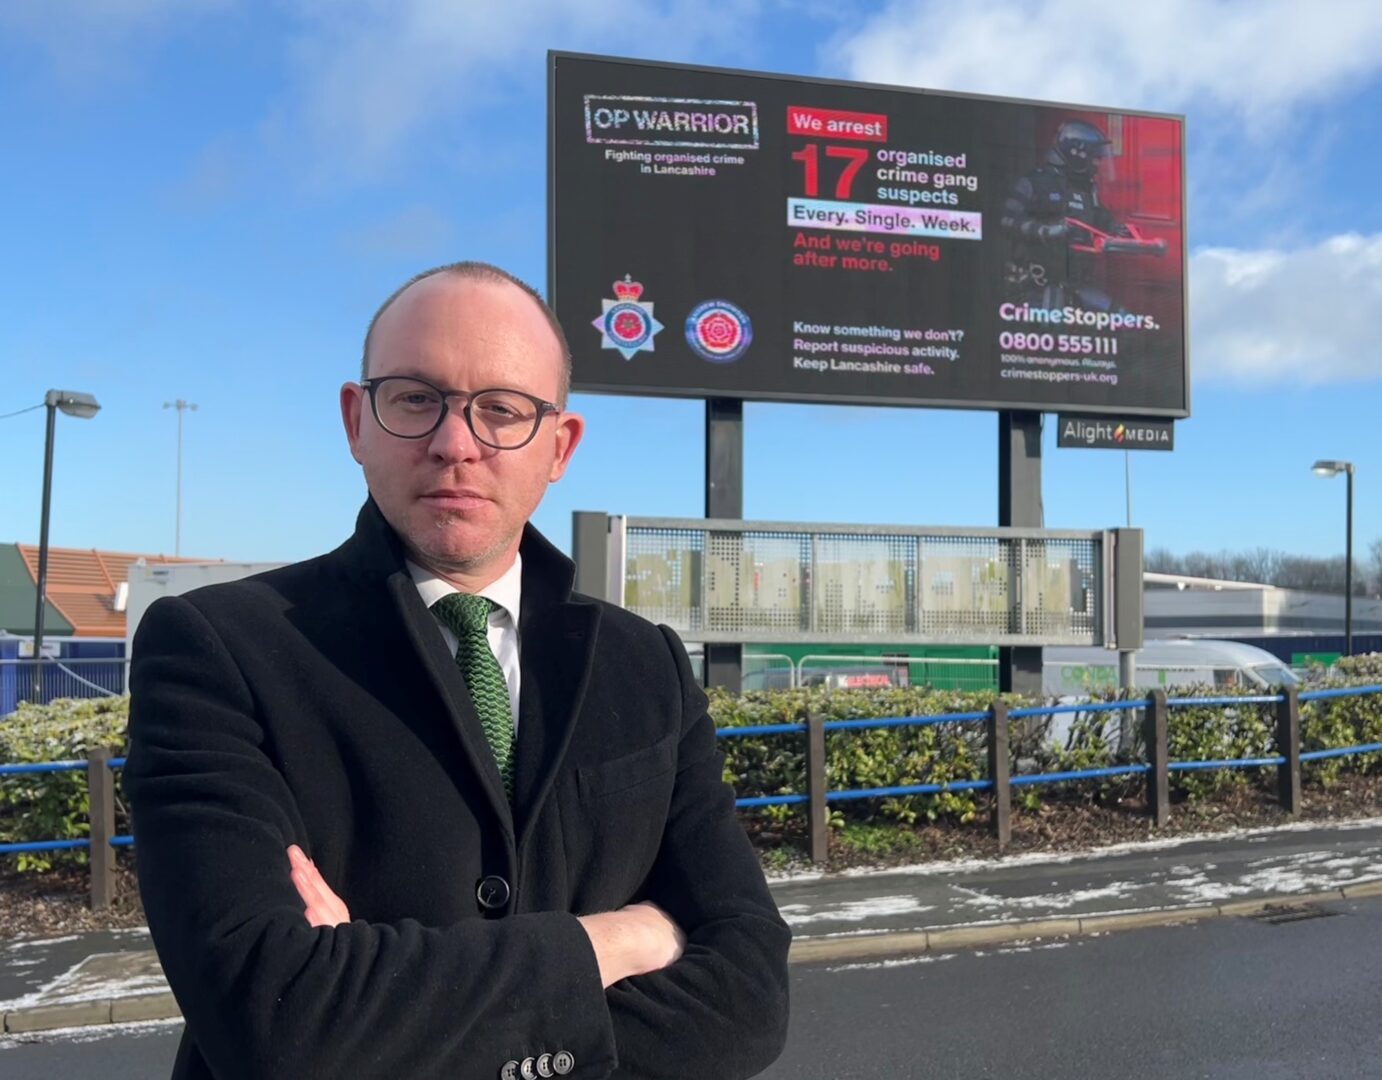 Commissioner Andrew Snowden in front of Op Warrior campaign billboard